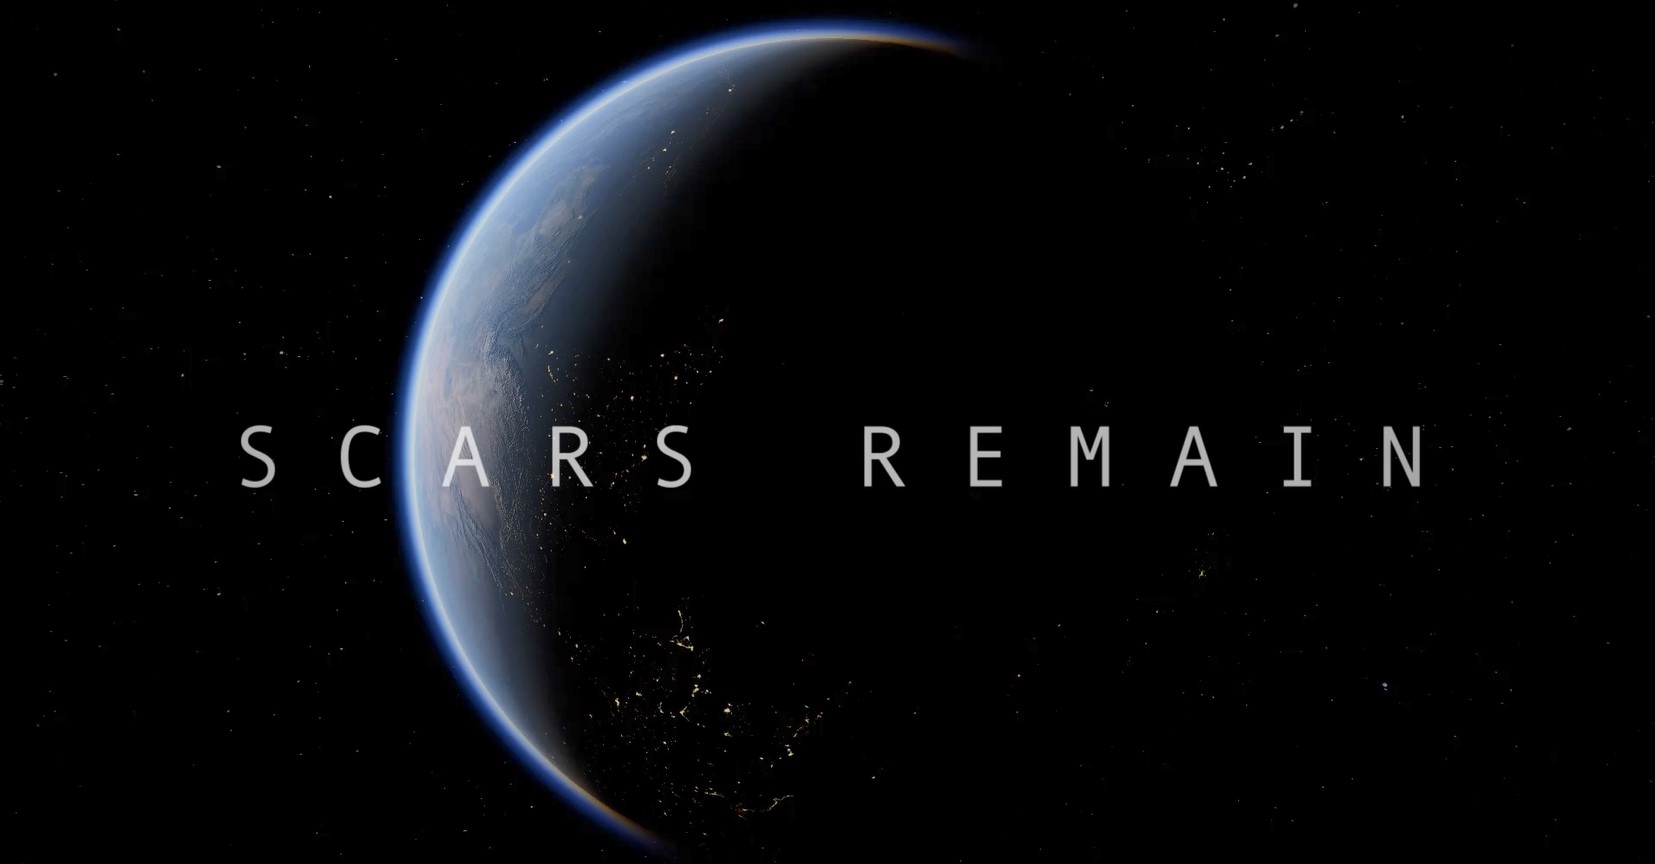 Still of title screen from student film featuring planet earth in heavy shadow with the title text "Scars Remain" overlayed.